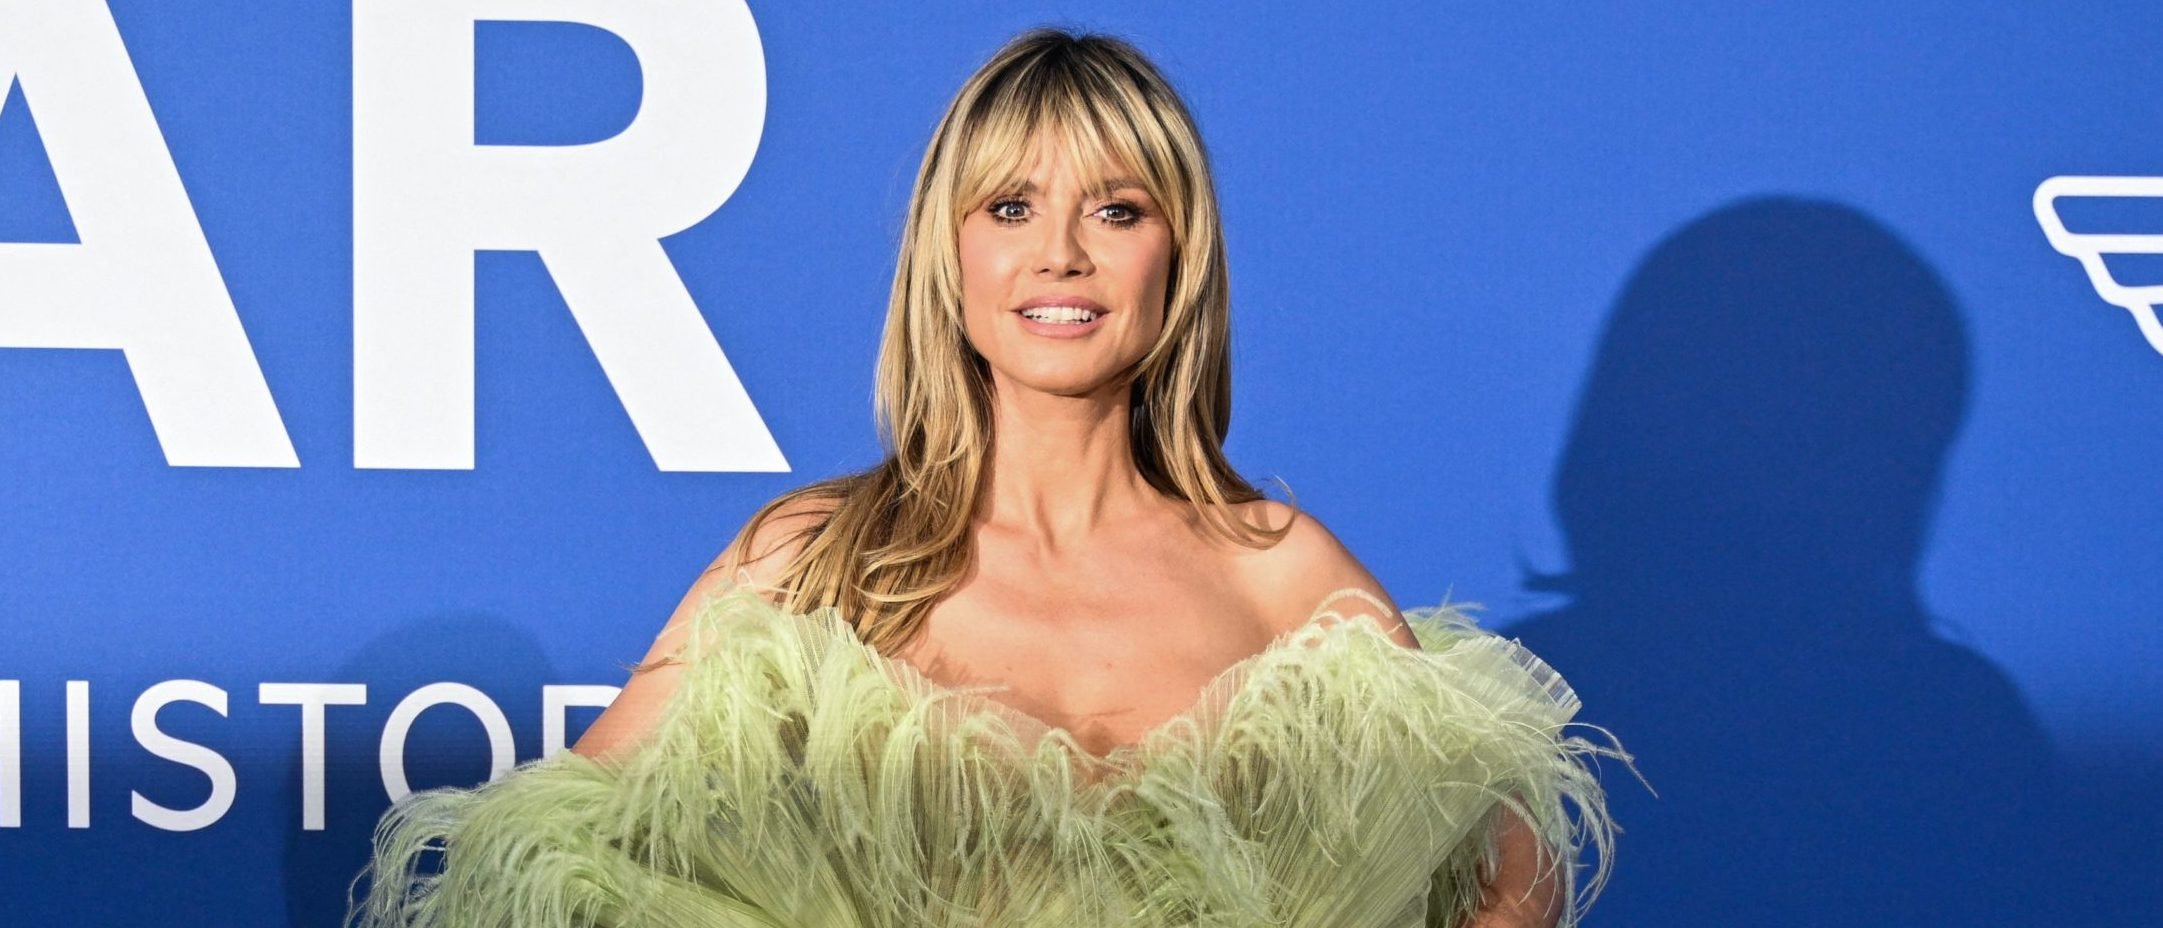 Heidi Klum Wanted Biggest Wings for Victoria's Secret Fashion Shows